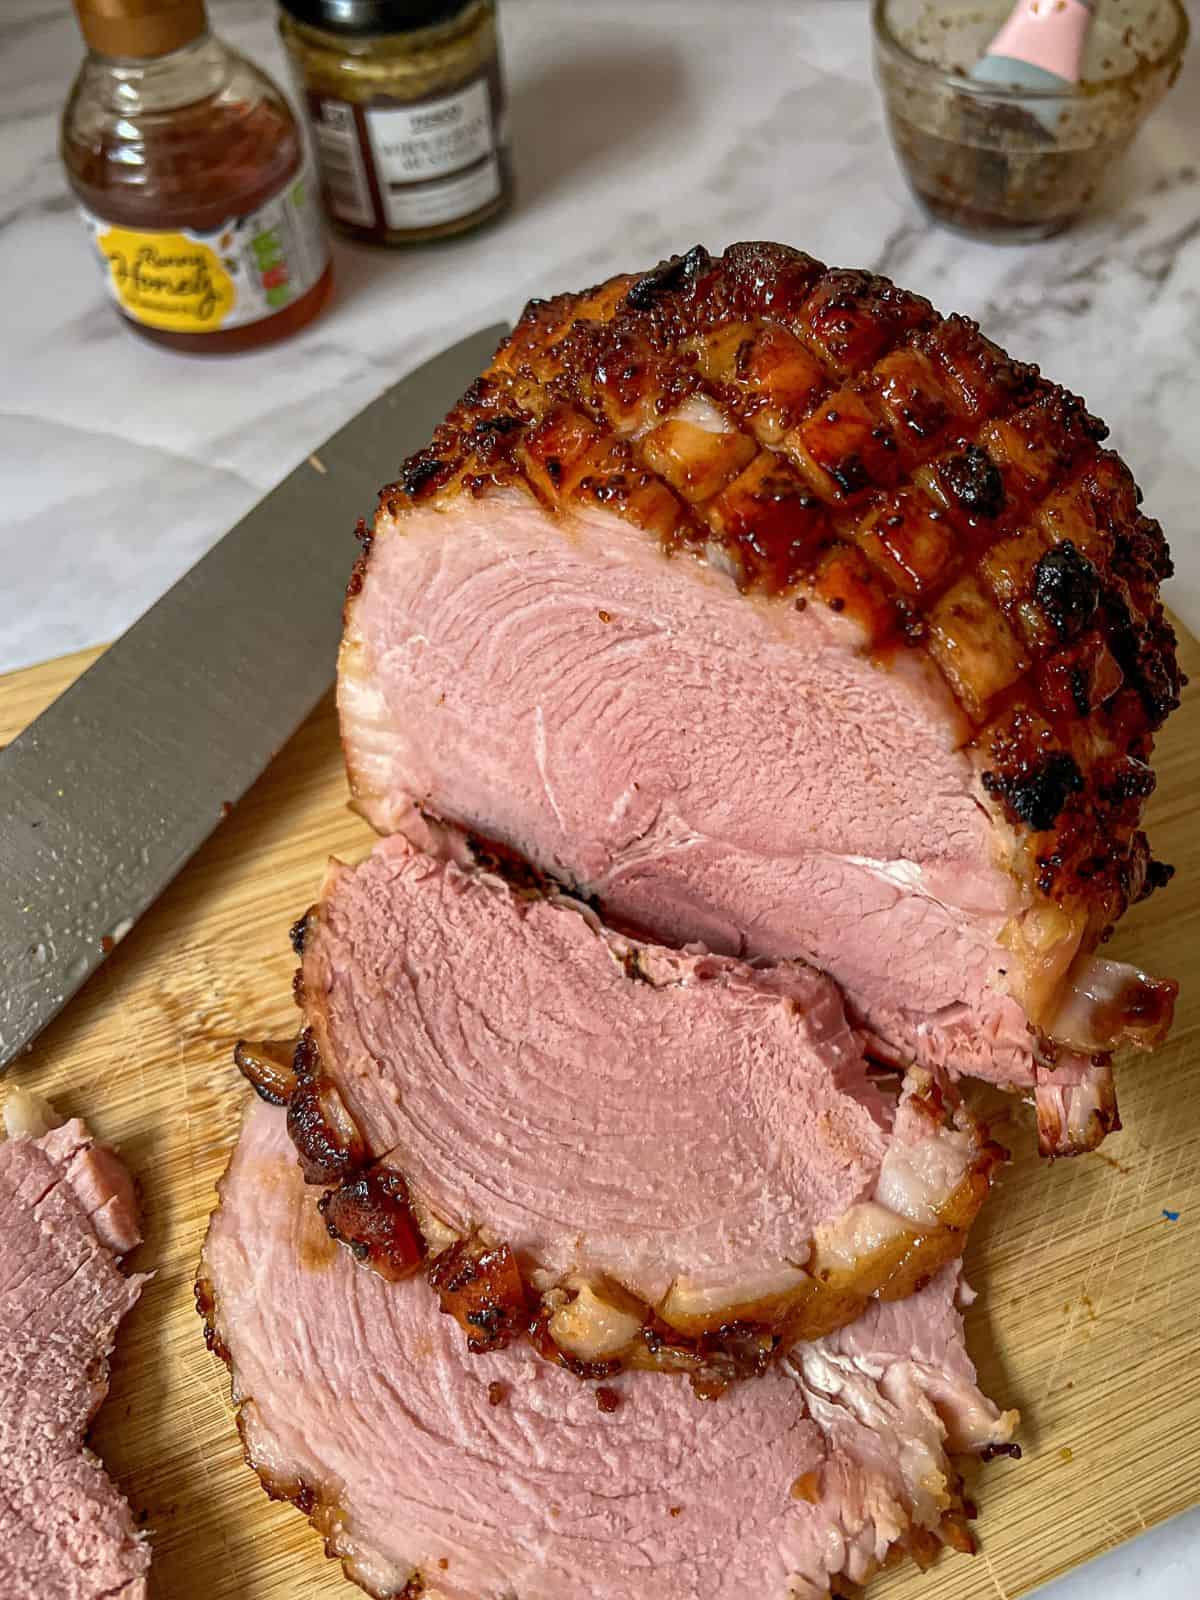 Carved ham (gammon) on a chopping board that has a knife on. A bottle of honey and a jar of mustard are in the background.